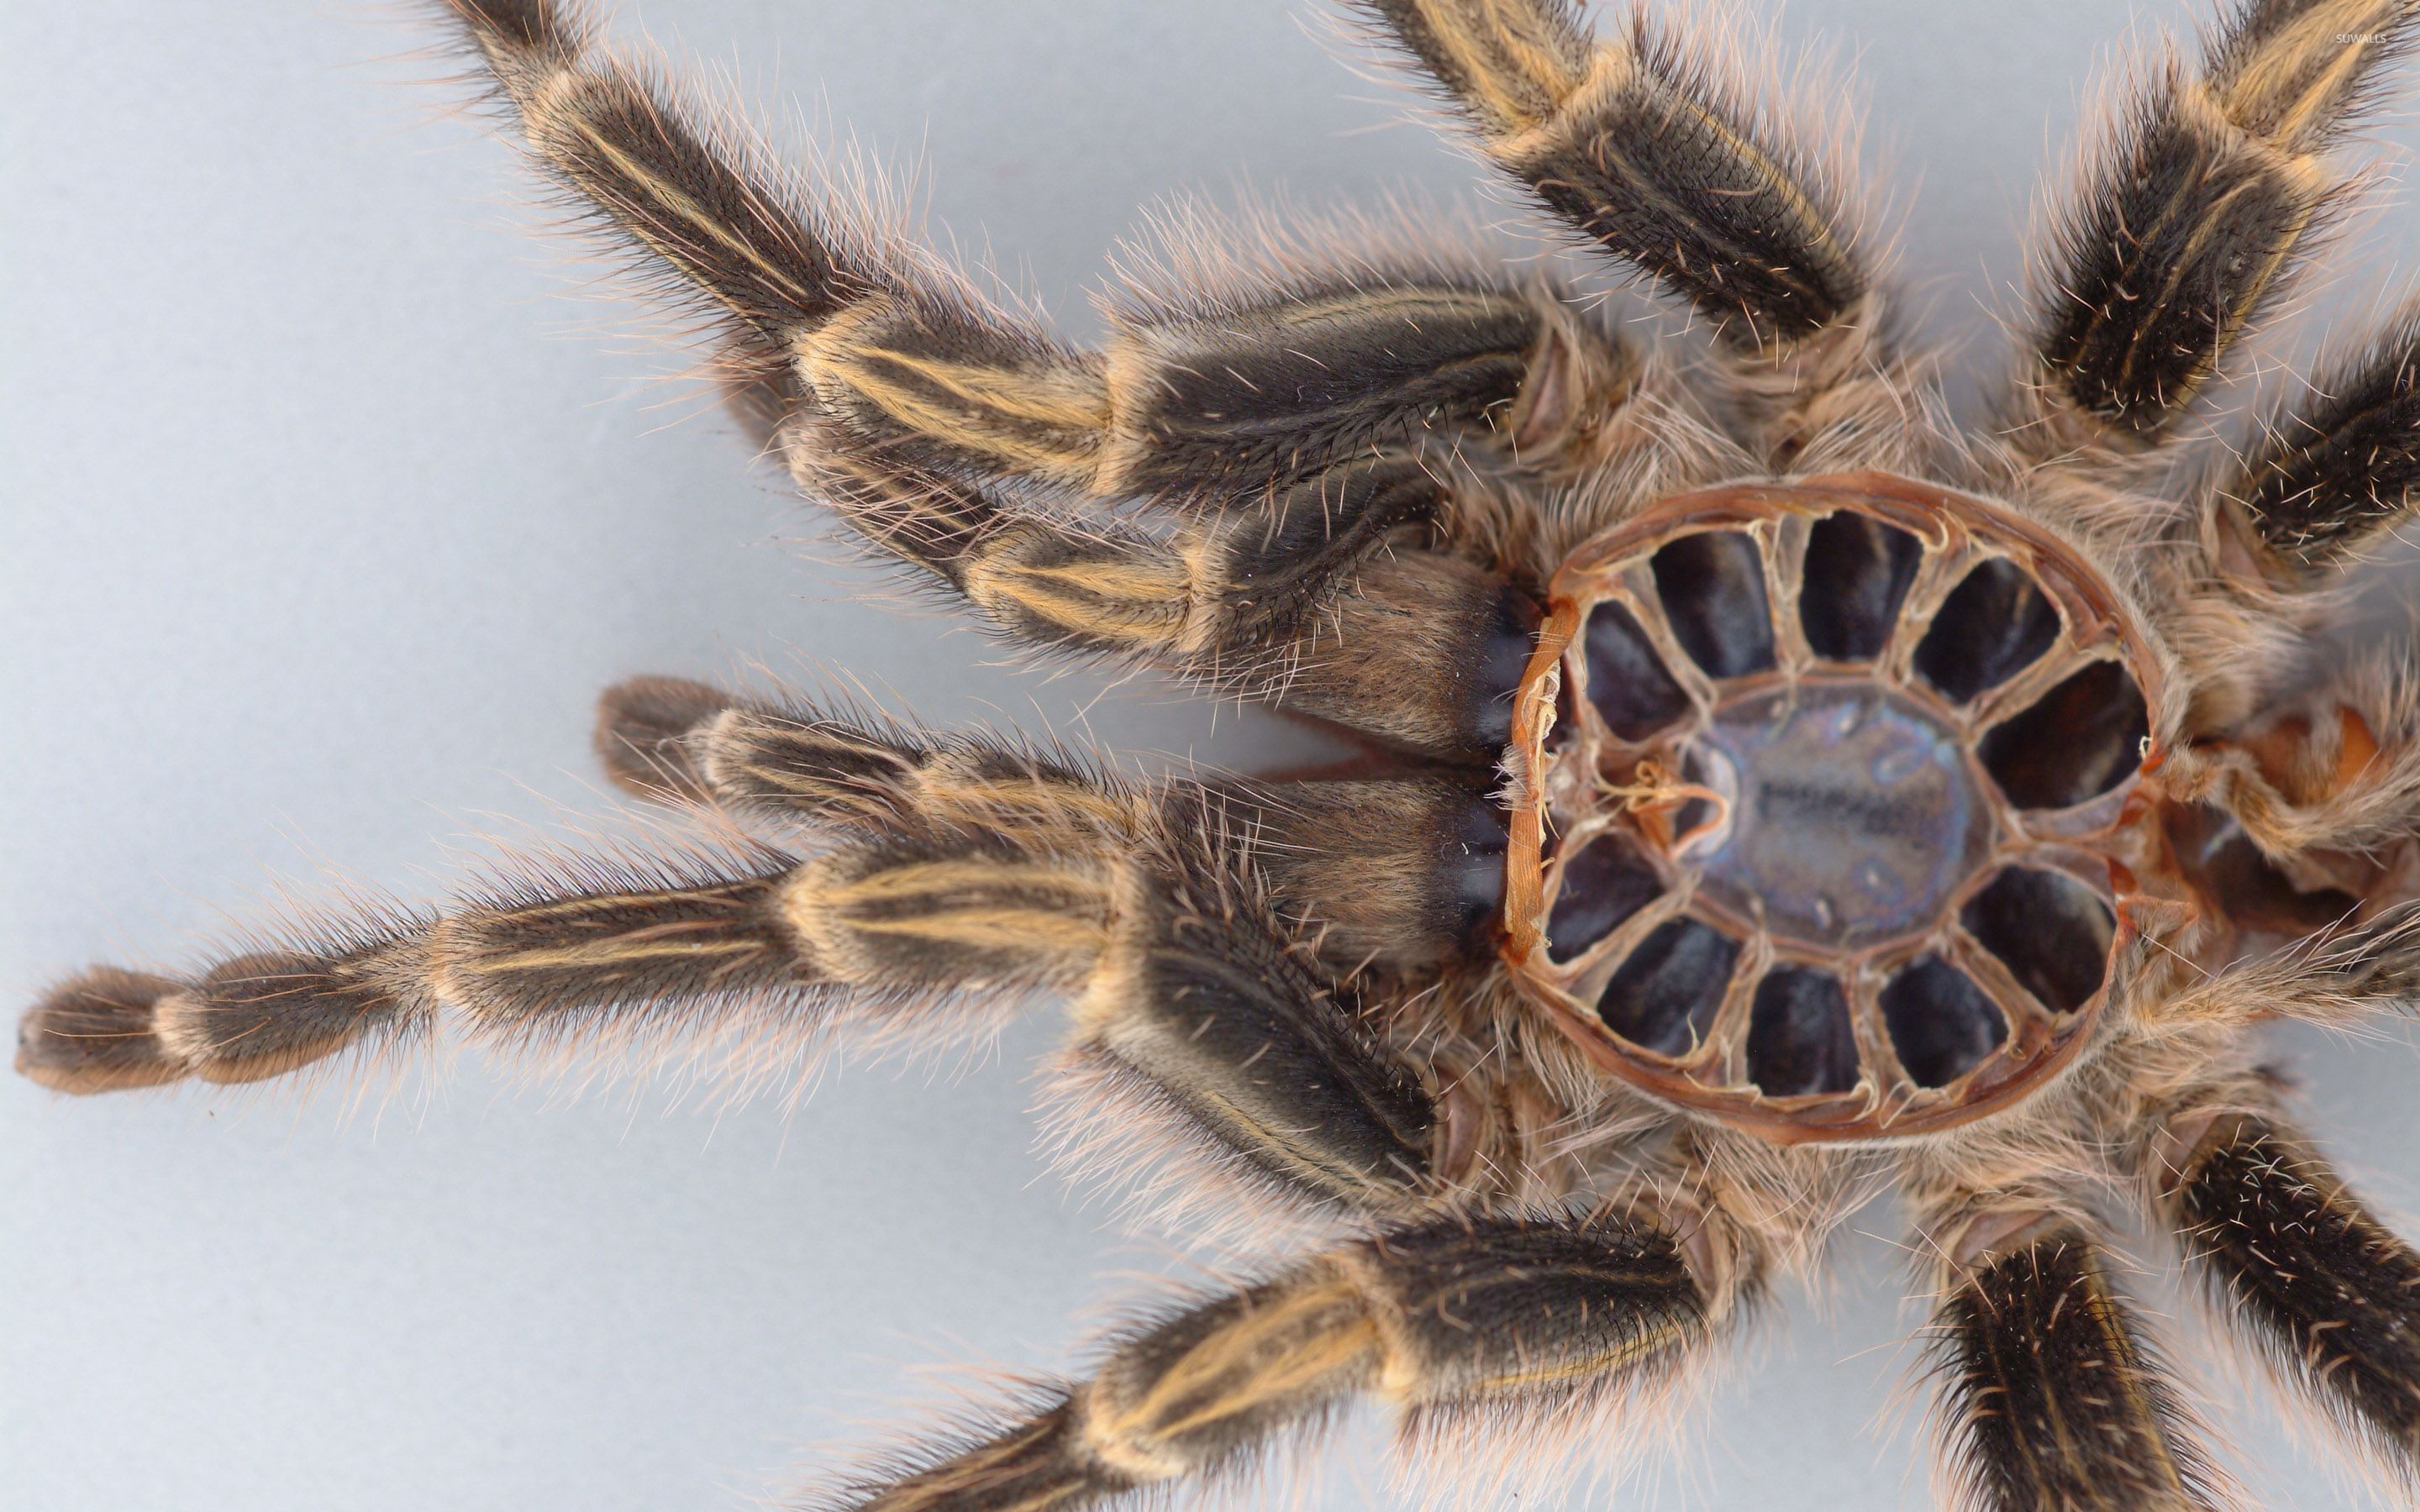 Spider close-up wallpaper - Animal wallpapers - #30032